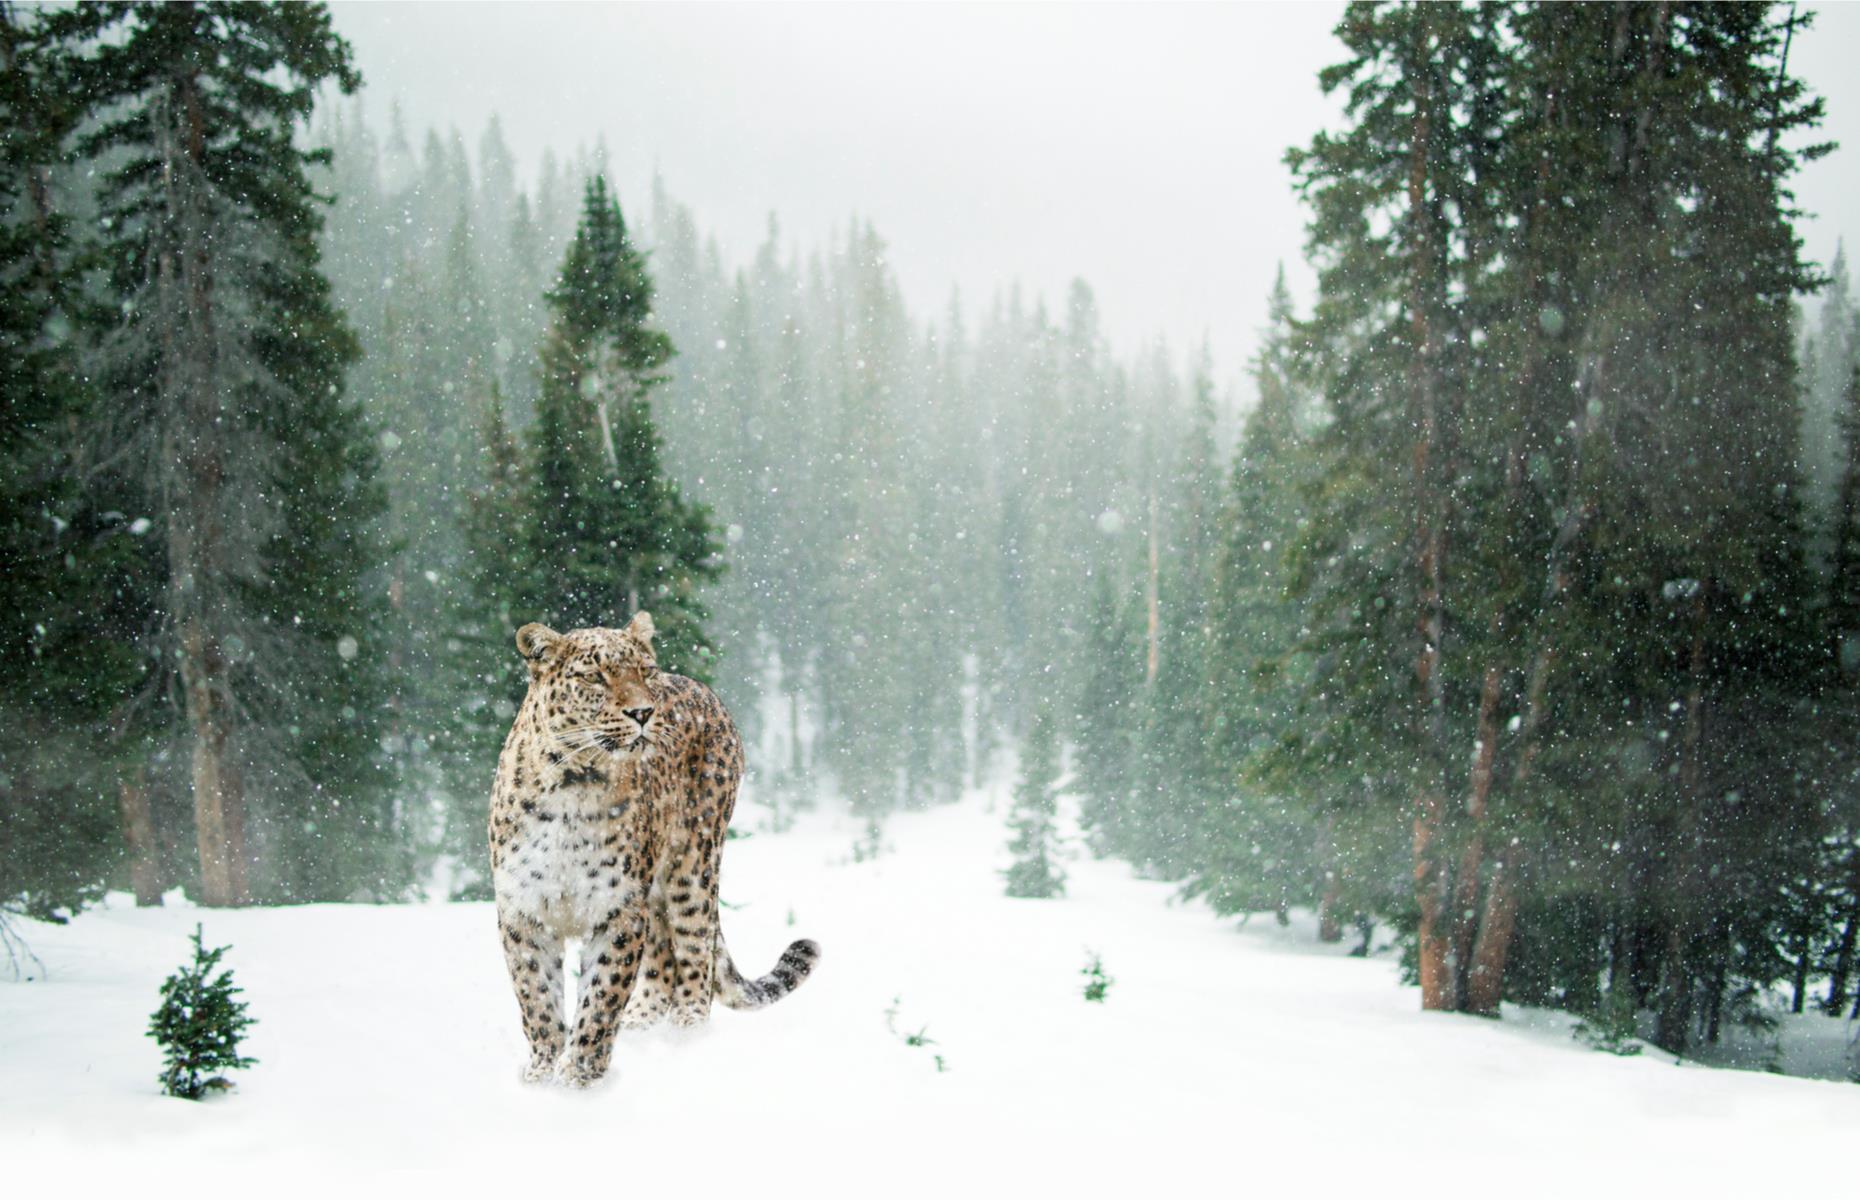 <p>Travel expedition specialists <a href="https://pelorusx.com/snow-leopards-himalayas-north-india/">Pelorus</a> work with guides who helped the BBC Natural History unit track and film these predators for smash-hit nature documentary <em>Planet Earth</em>. Now they’re opening up the adventure to intrepid guests – join local experts to see snow leopards in their natural habitat of Ulley Valley, in the region of Jammu and Kashmir.</p>  <p><strong><a href="https://www.loveexploring.com/gallerylist/85261/incredible-photos-of-abandoned-islands-the-world-forgot">Incredible photos of abandoned islands the world forgot</a></strong></p>